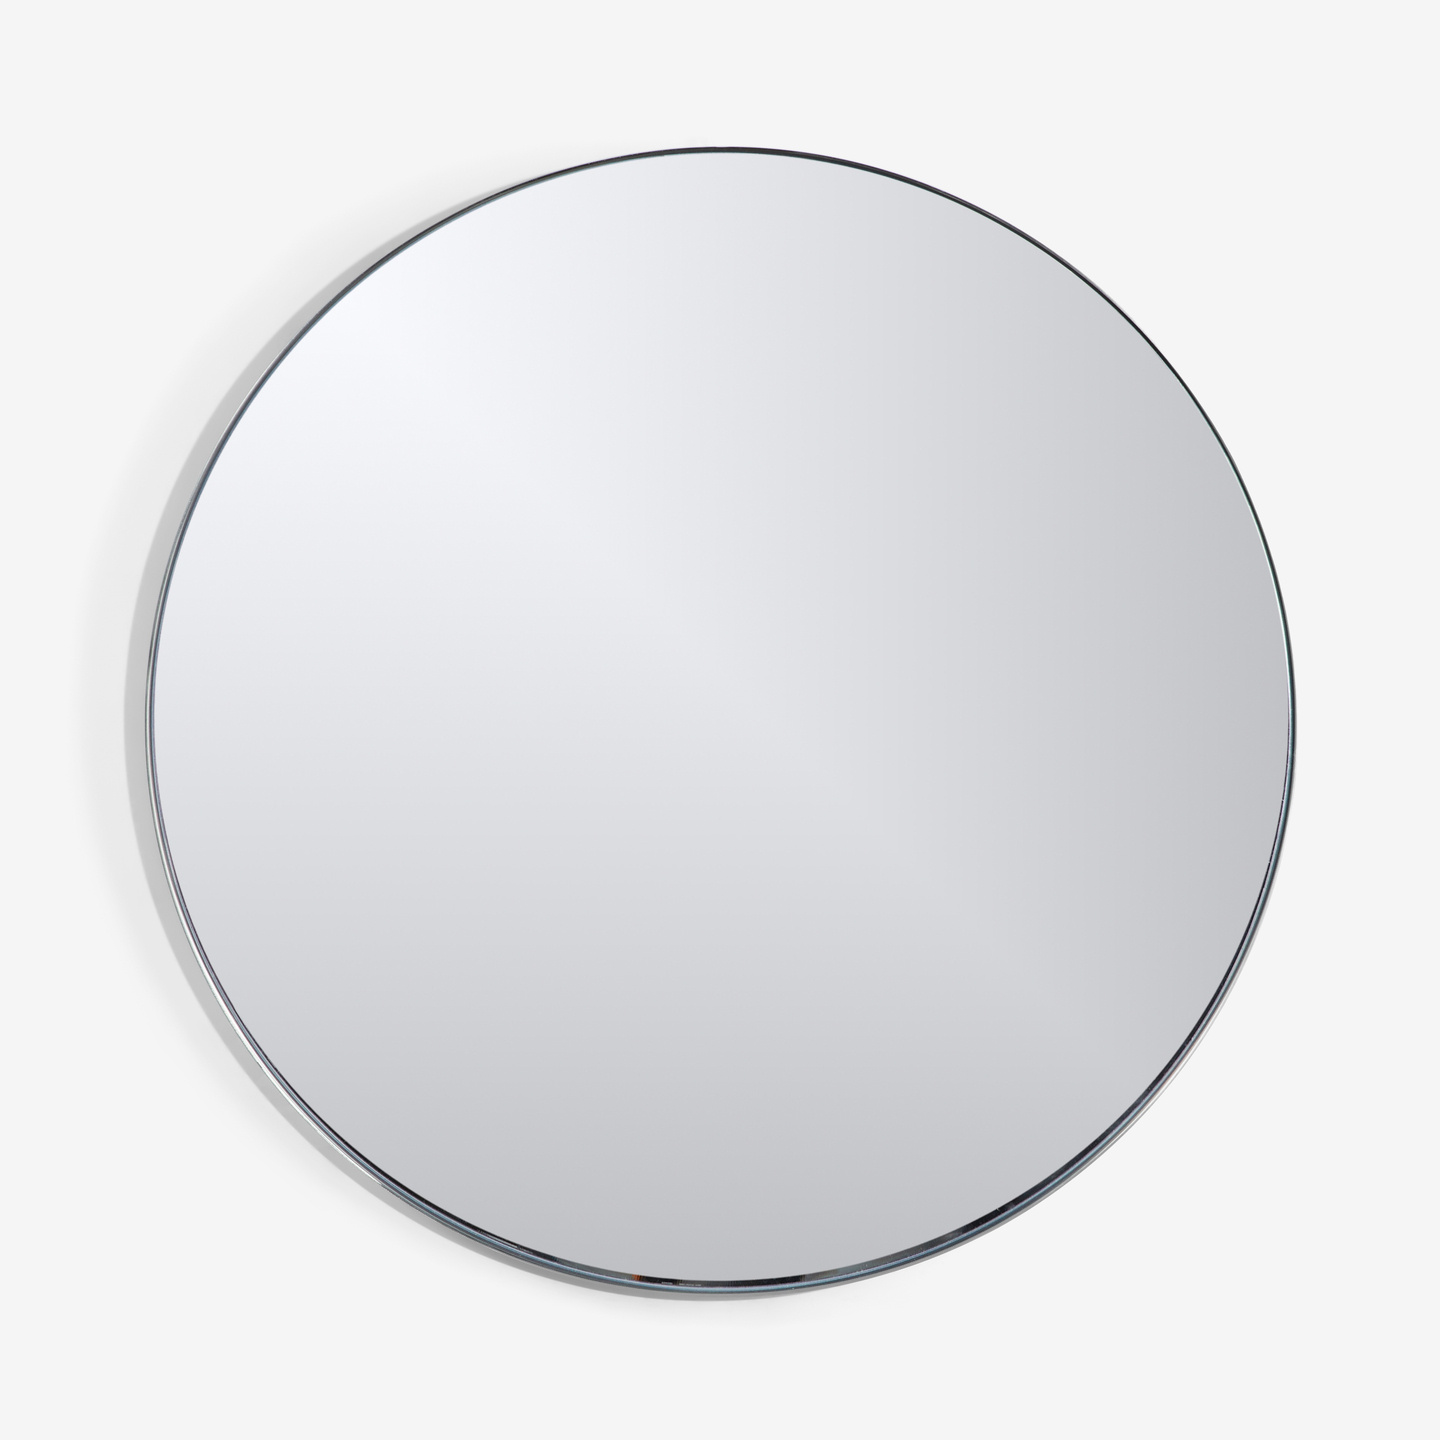 713_Edge-Brushed-Nickel-Round-30-Wall-Mirror_Flat-Front_Mid-Century_Dining-Room-14 2020